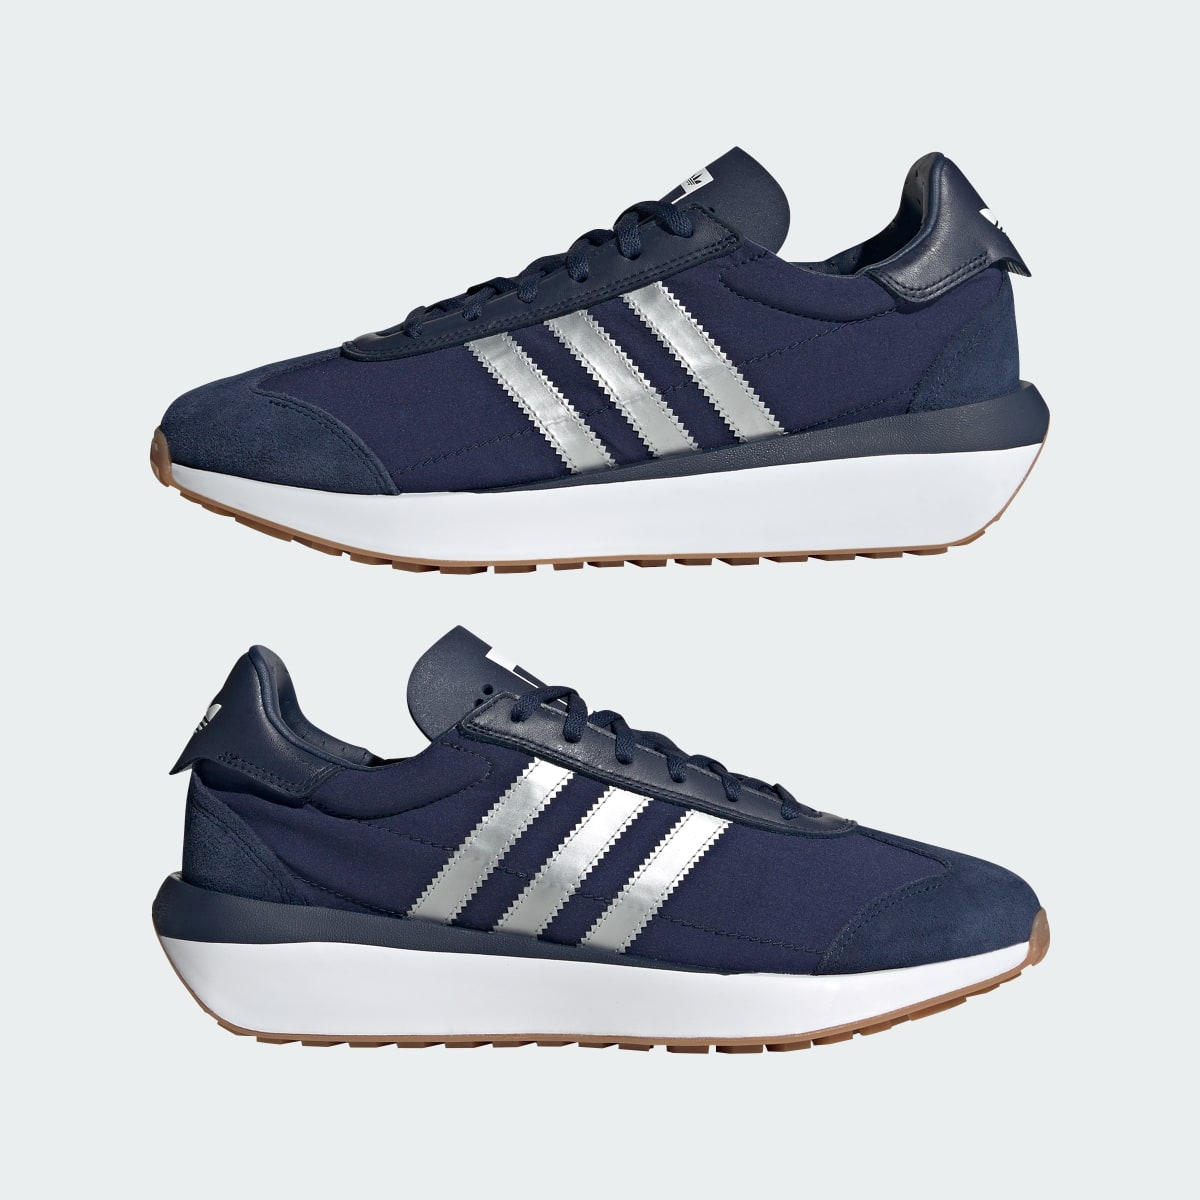 Adidas Country XLG Shoes. 8